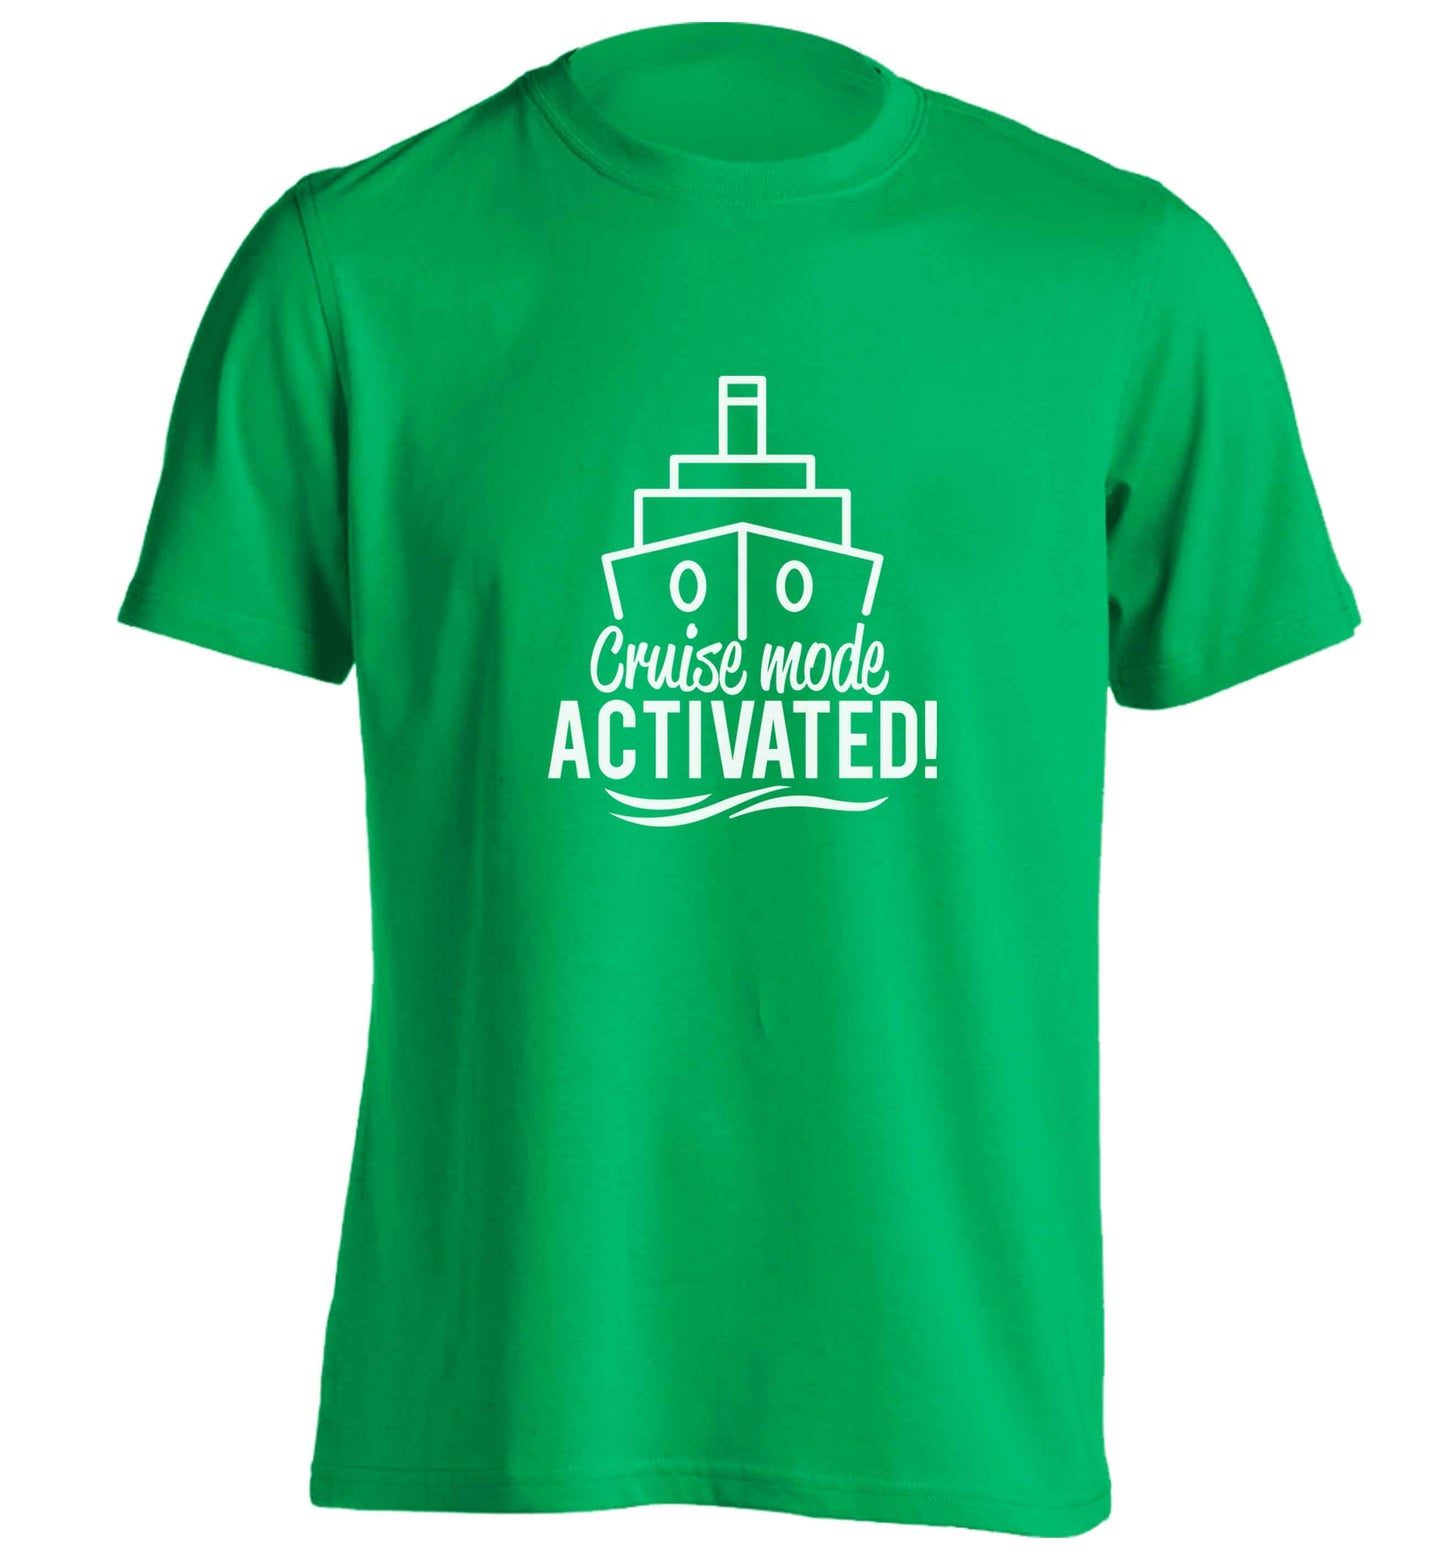 Cruise mode activated adults unisex green Tshirt 2XL